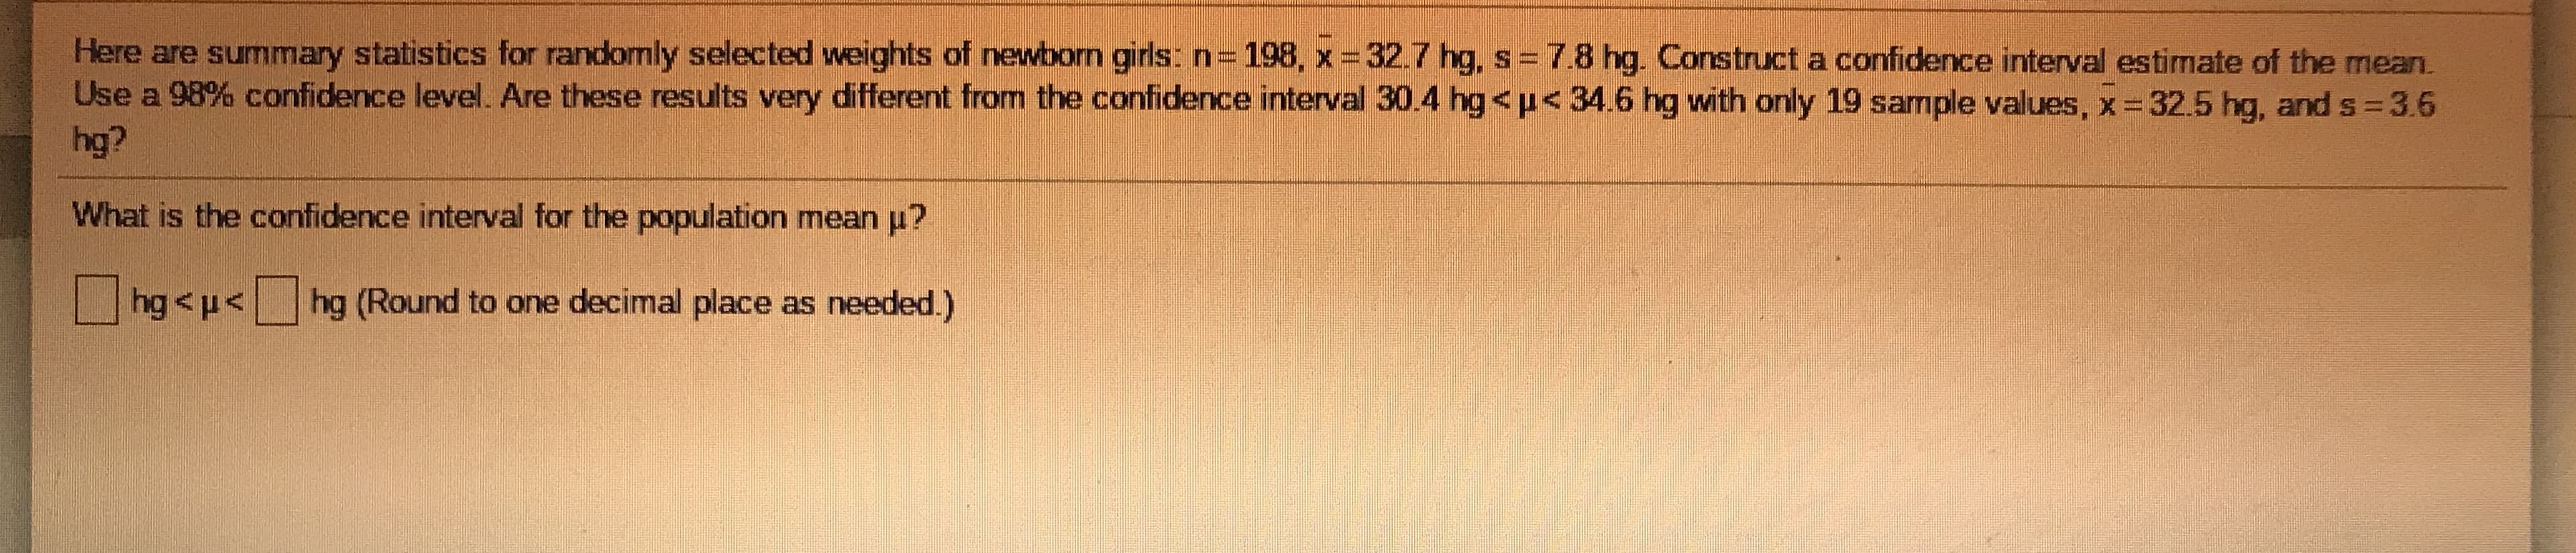 Here are summary statistics for randomly selected weights of newborn girls: n=198, x =32.7 hg, s = 7.8 hg. Construct a confidence interval estimate of the mean.
Use a 98% confidence level. Are these results very different from the confidence interval 30.4 hg<p<34.6 hg with only 19 sample values, x 32.5 hg, and s 3.6
hg?
What is the confidence interval for the population mean u?
hg<p<hg (Round to one decimal place as needed.)
